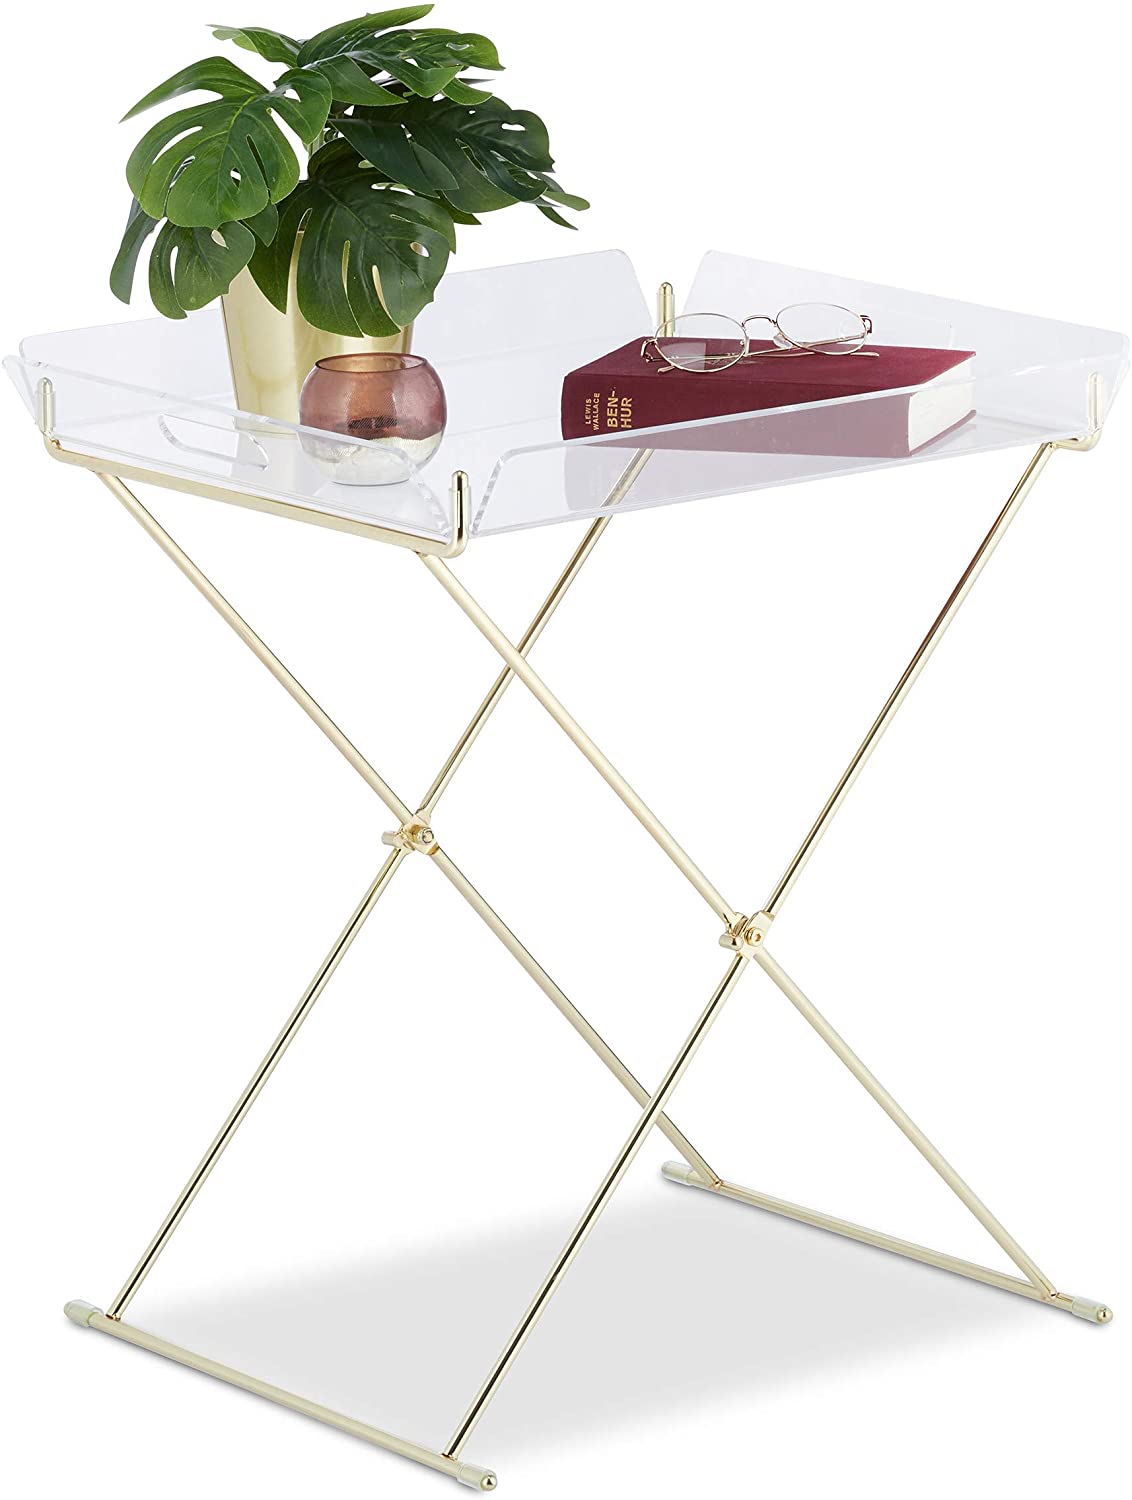 Relaxdays Folding Tray, Removable Acrylic Tray, Standing Tray With Metal Fr